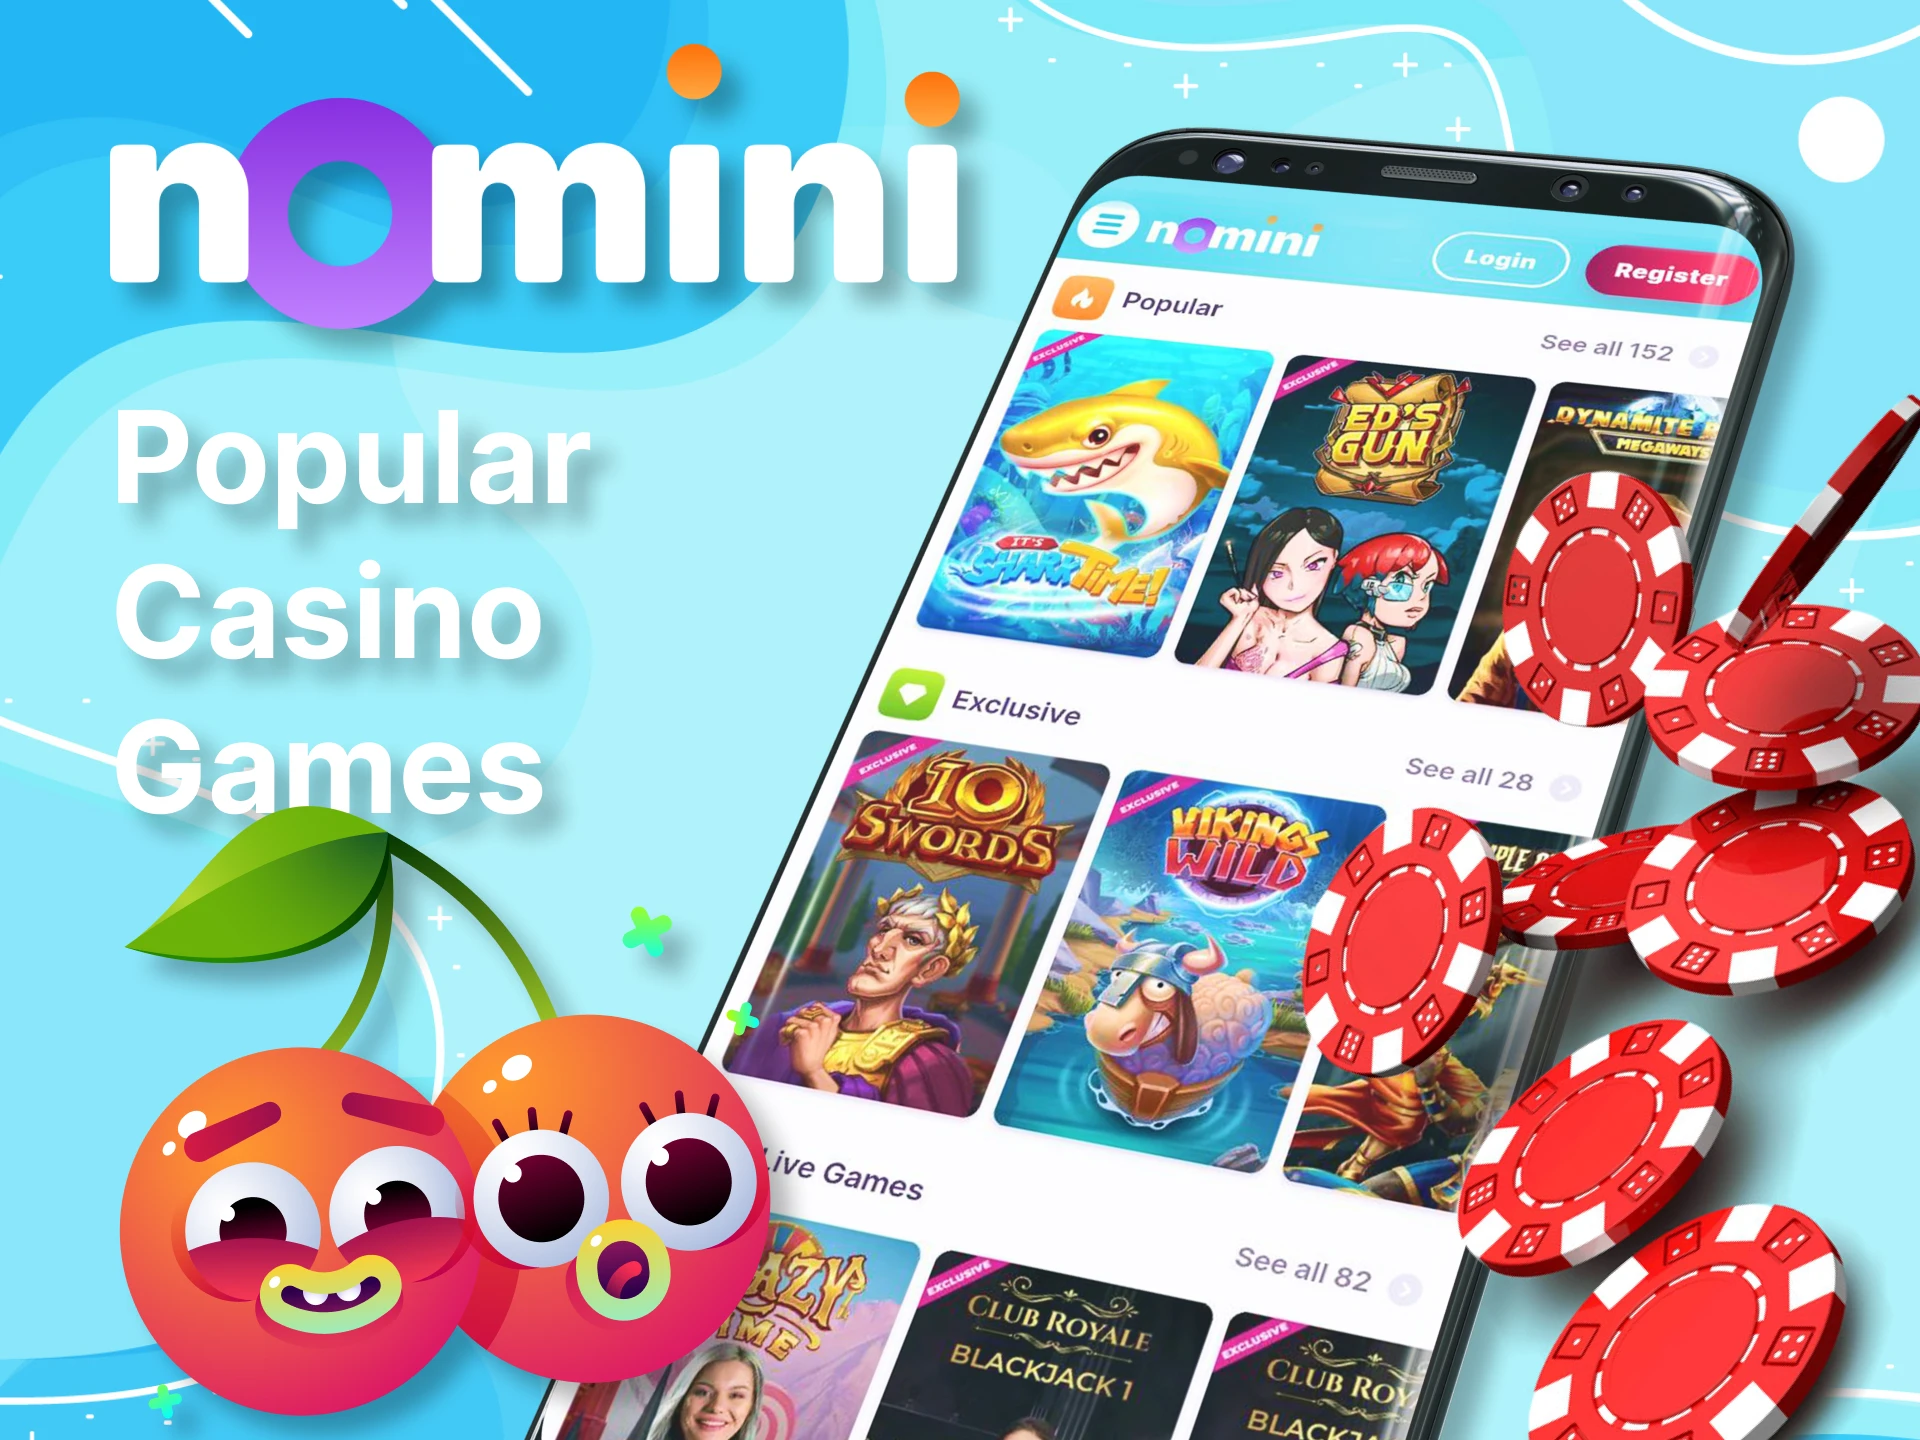 Try all the popular games from the Nomini app casino.